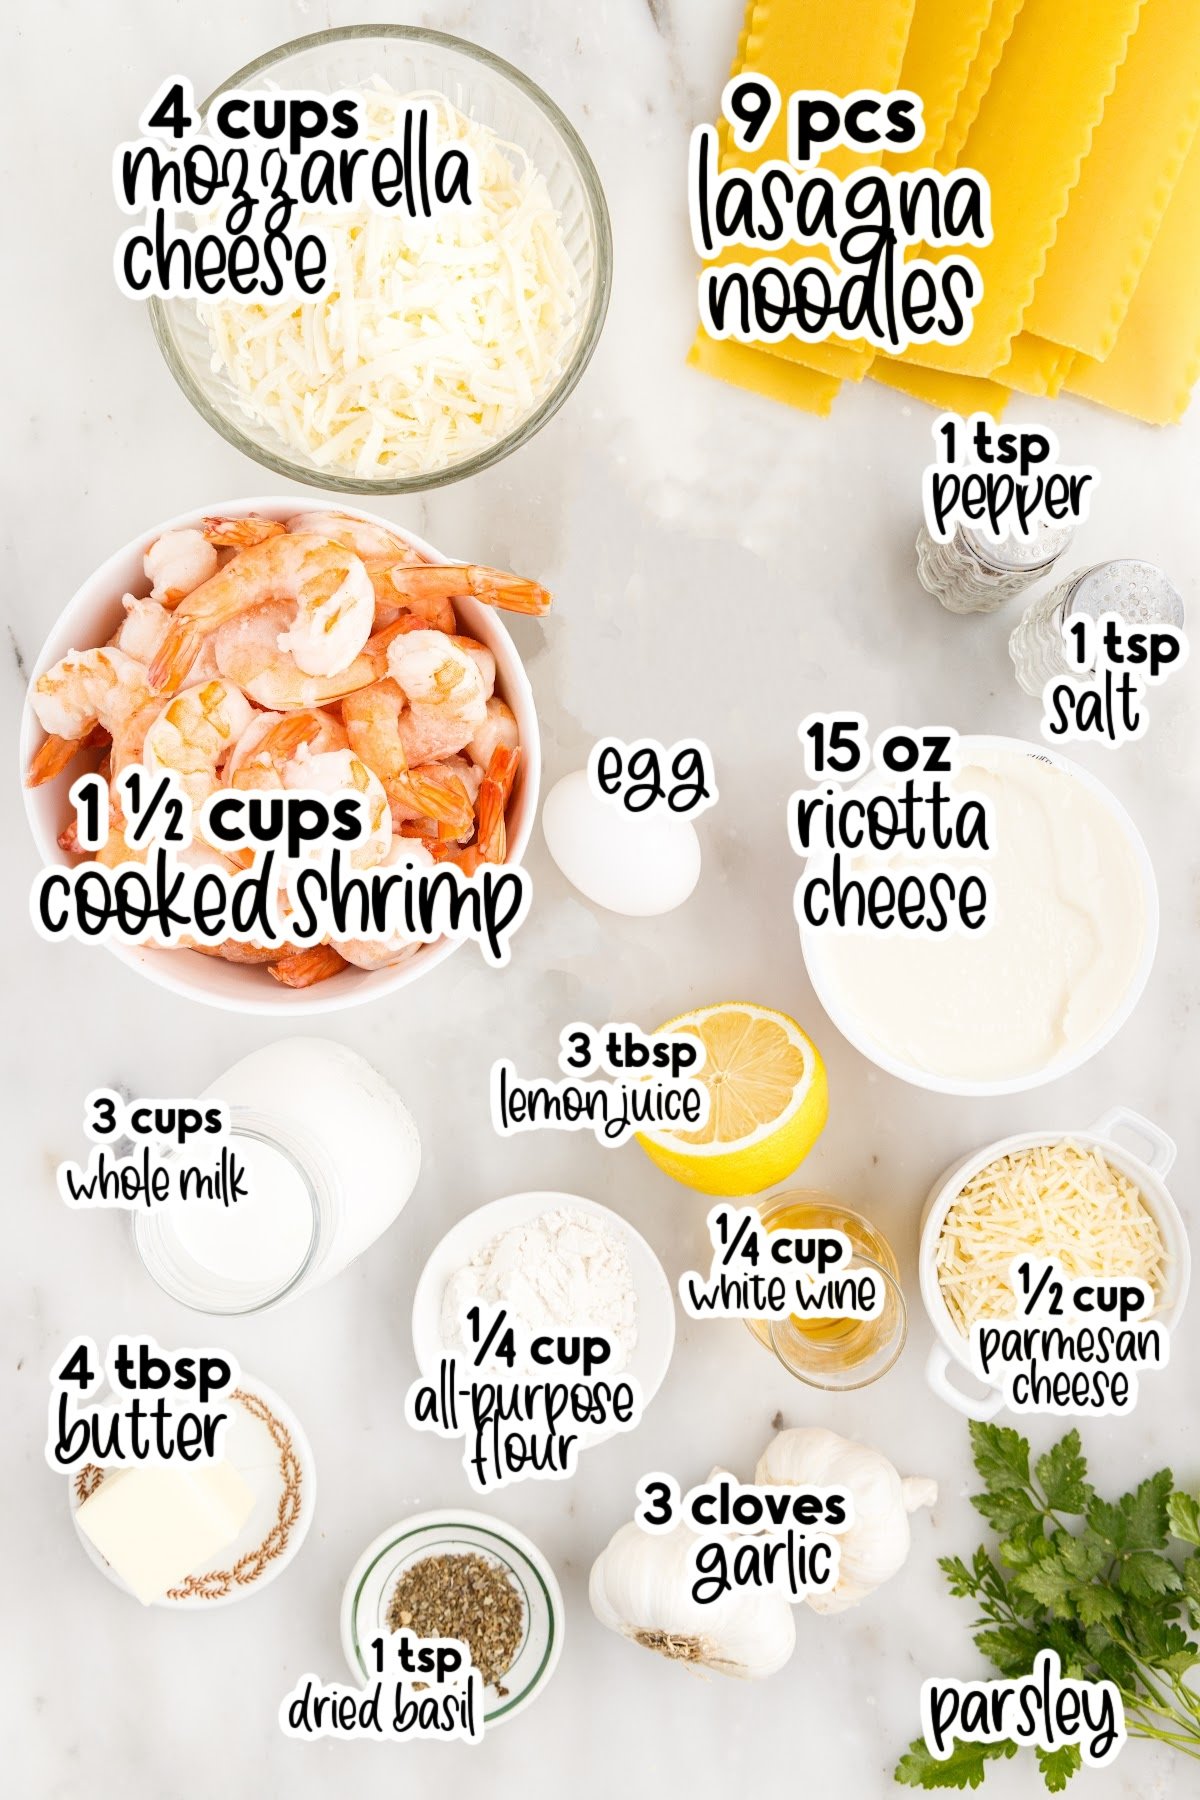 Ingredients needed to make Shrimp Lasagna with text overlay.